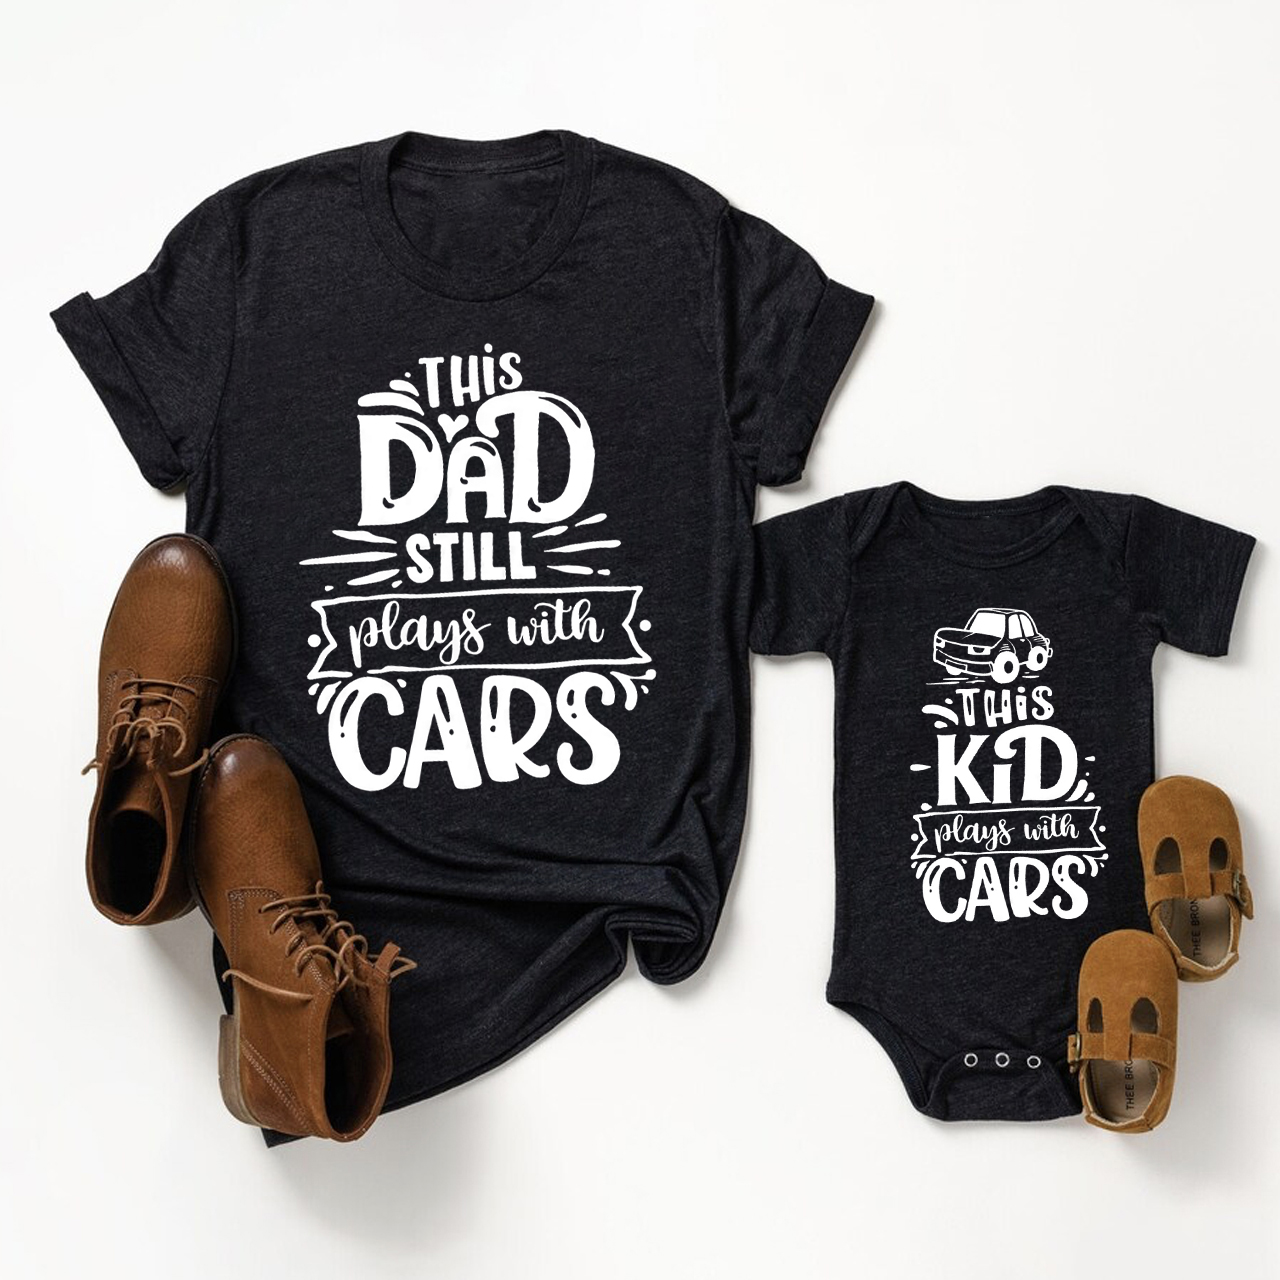 This Dad Still Plays With CARS Matching Tees For Dad & Me